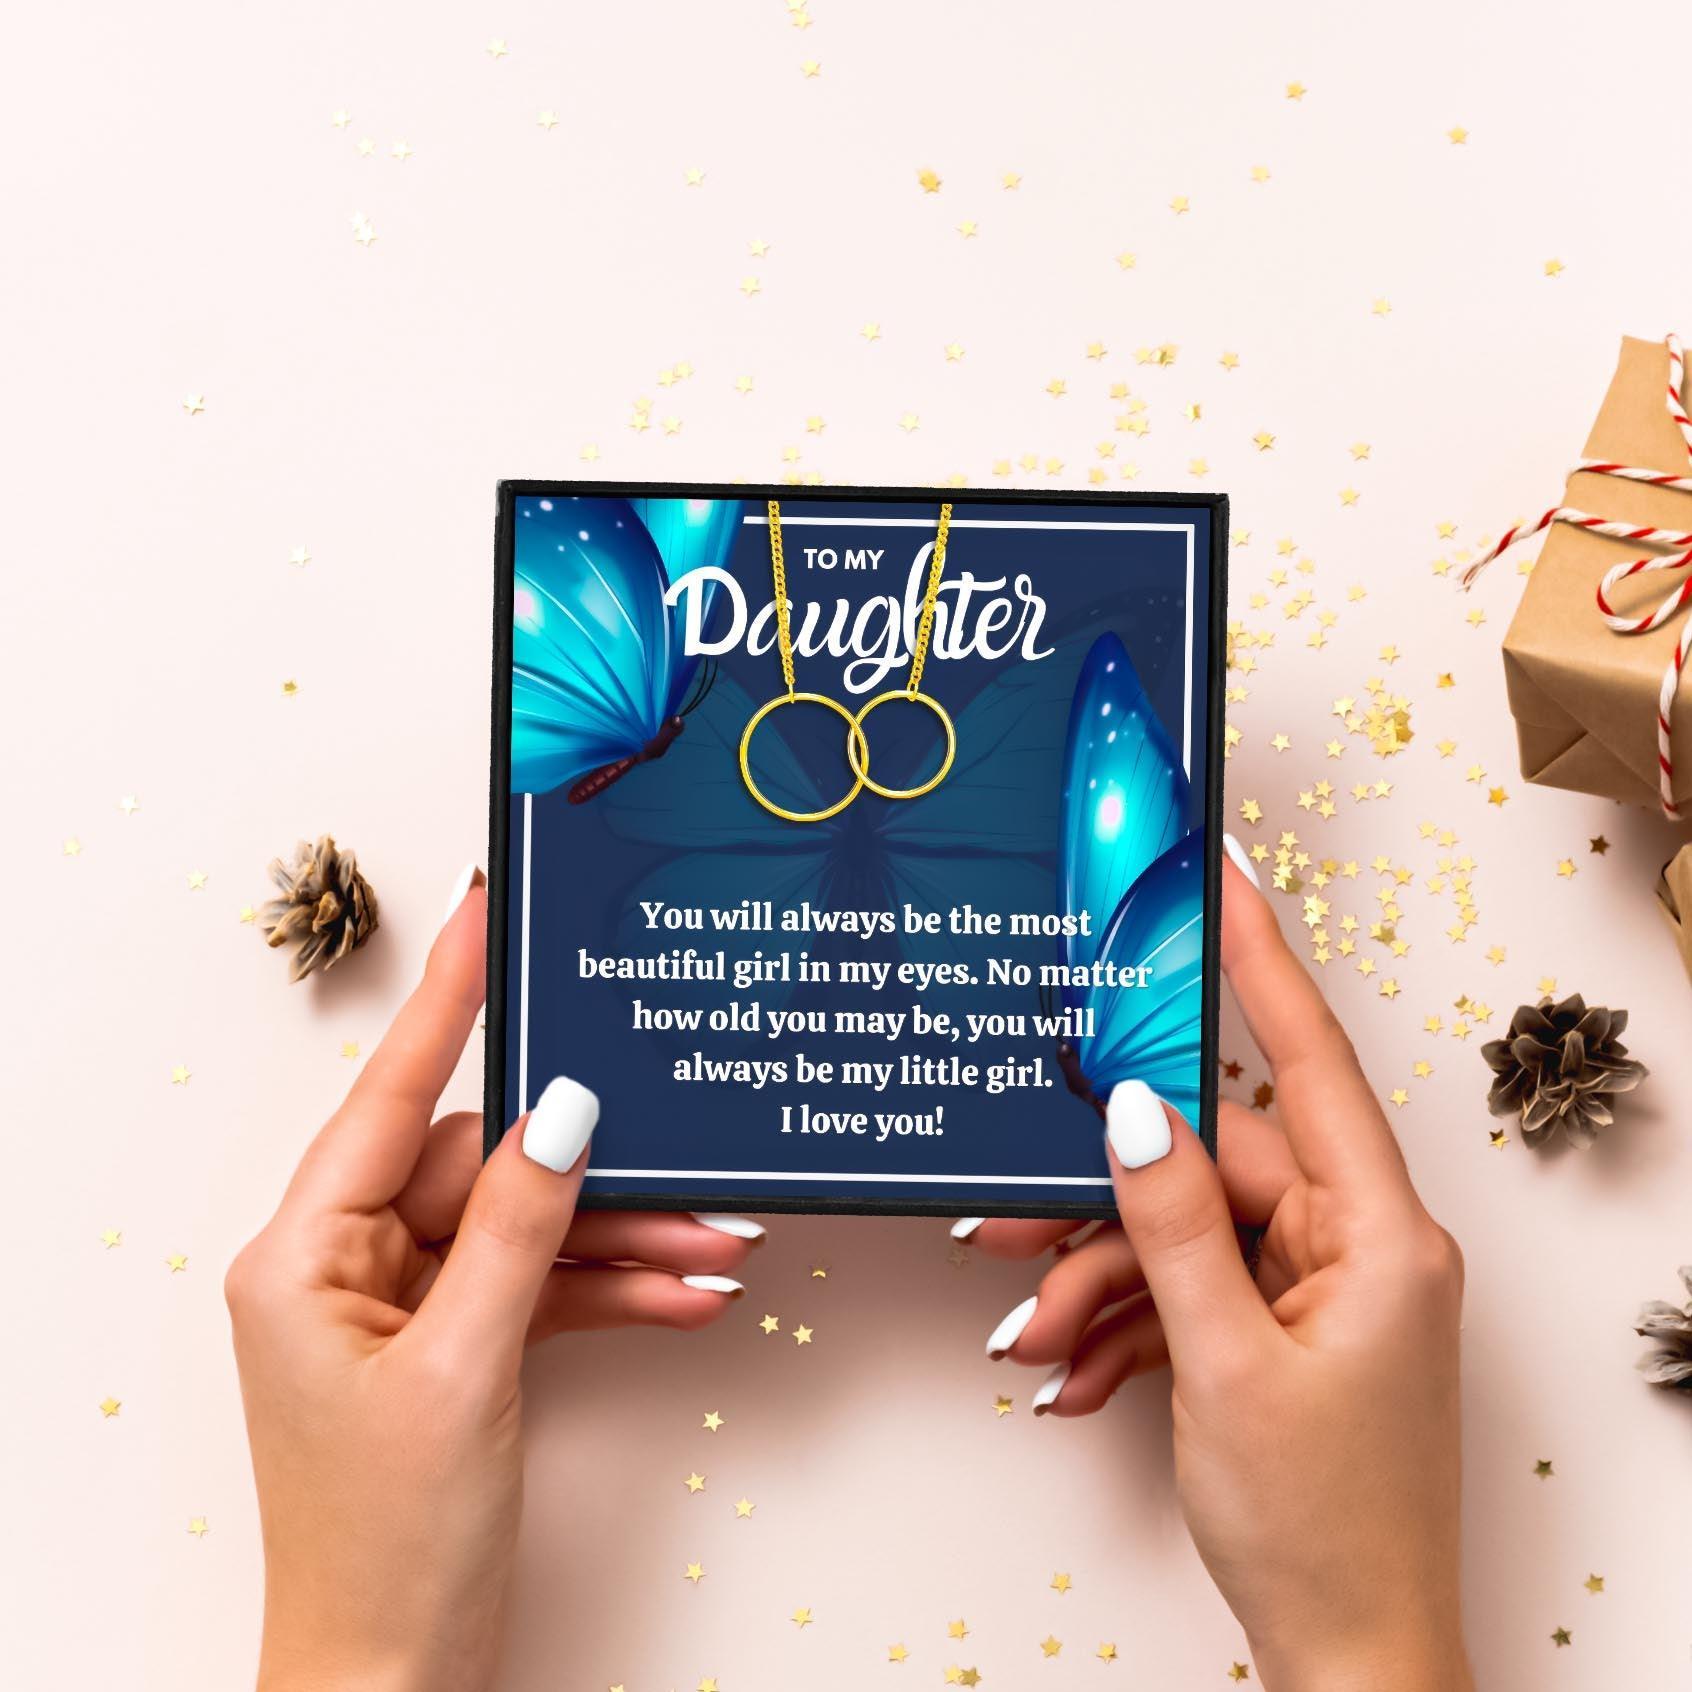 Mother Daughter Friend Open Circle Necklace Gift Set in 2023 | Mother Daughter Friend Open Circle Necklace Gift Set - undefined | double circle for daughter, Double Circle Gift Necklace, Double Circle Necklaces, Mother Daughter Interlocking Circle Necklace Gift Set | From Hunny Life | hunnylife.com